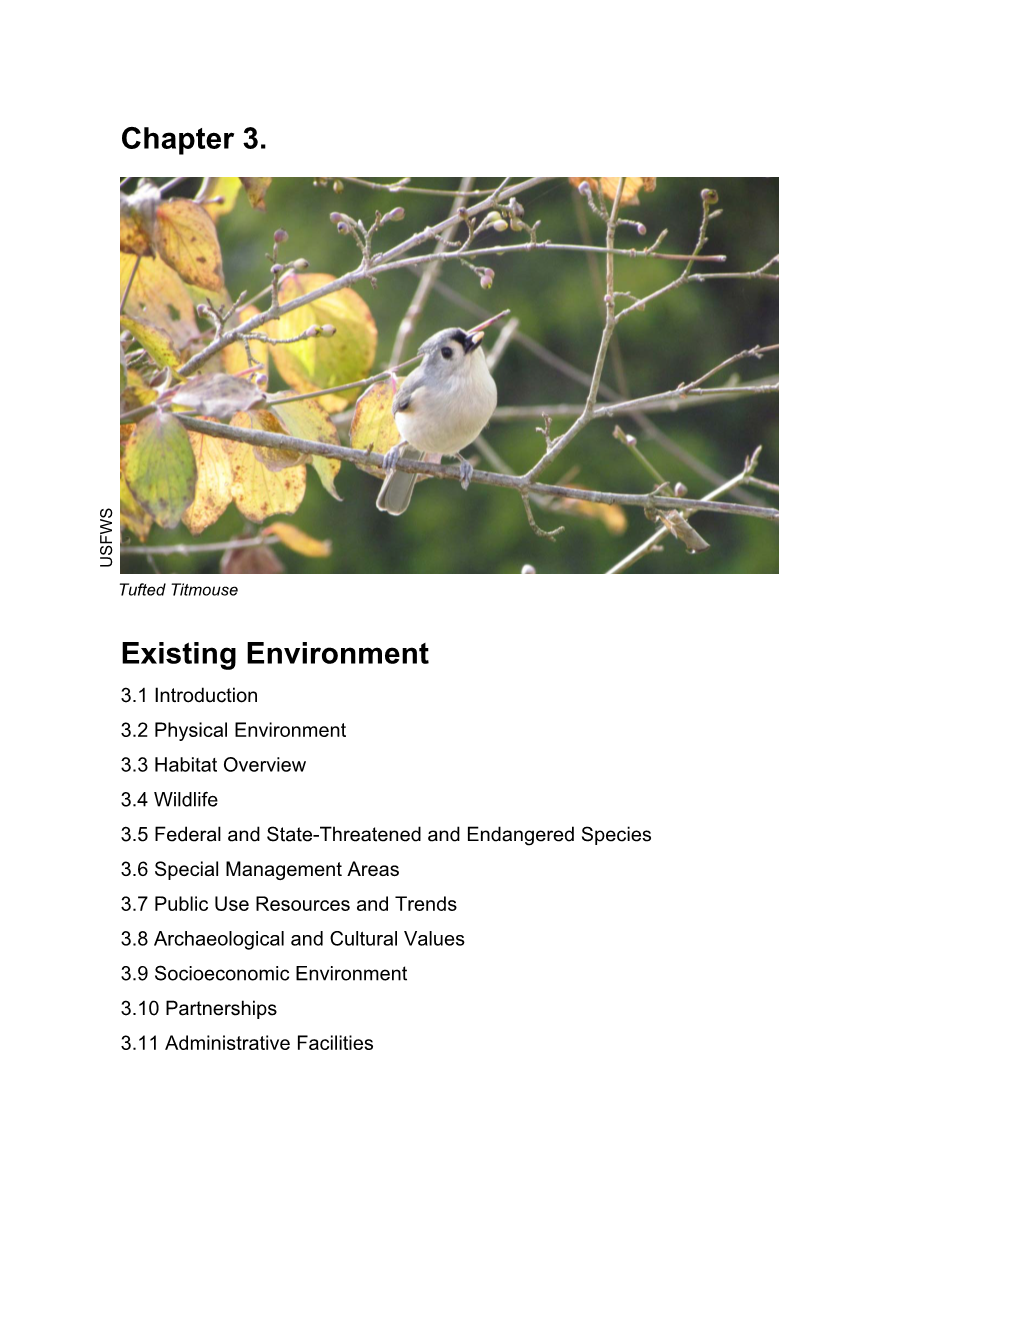 Chapter 3. Existing Environment